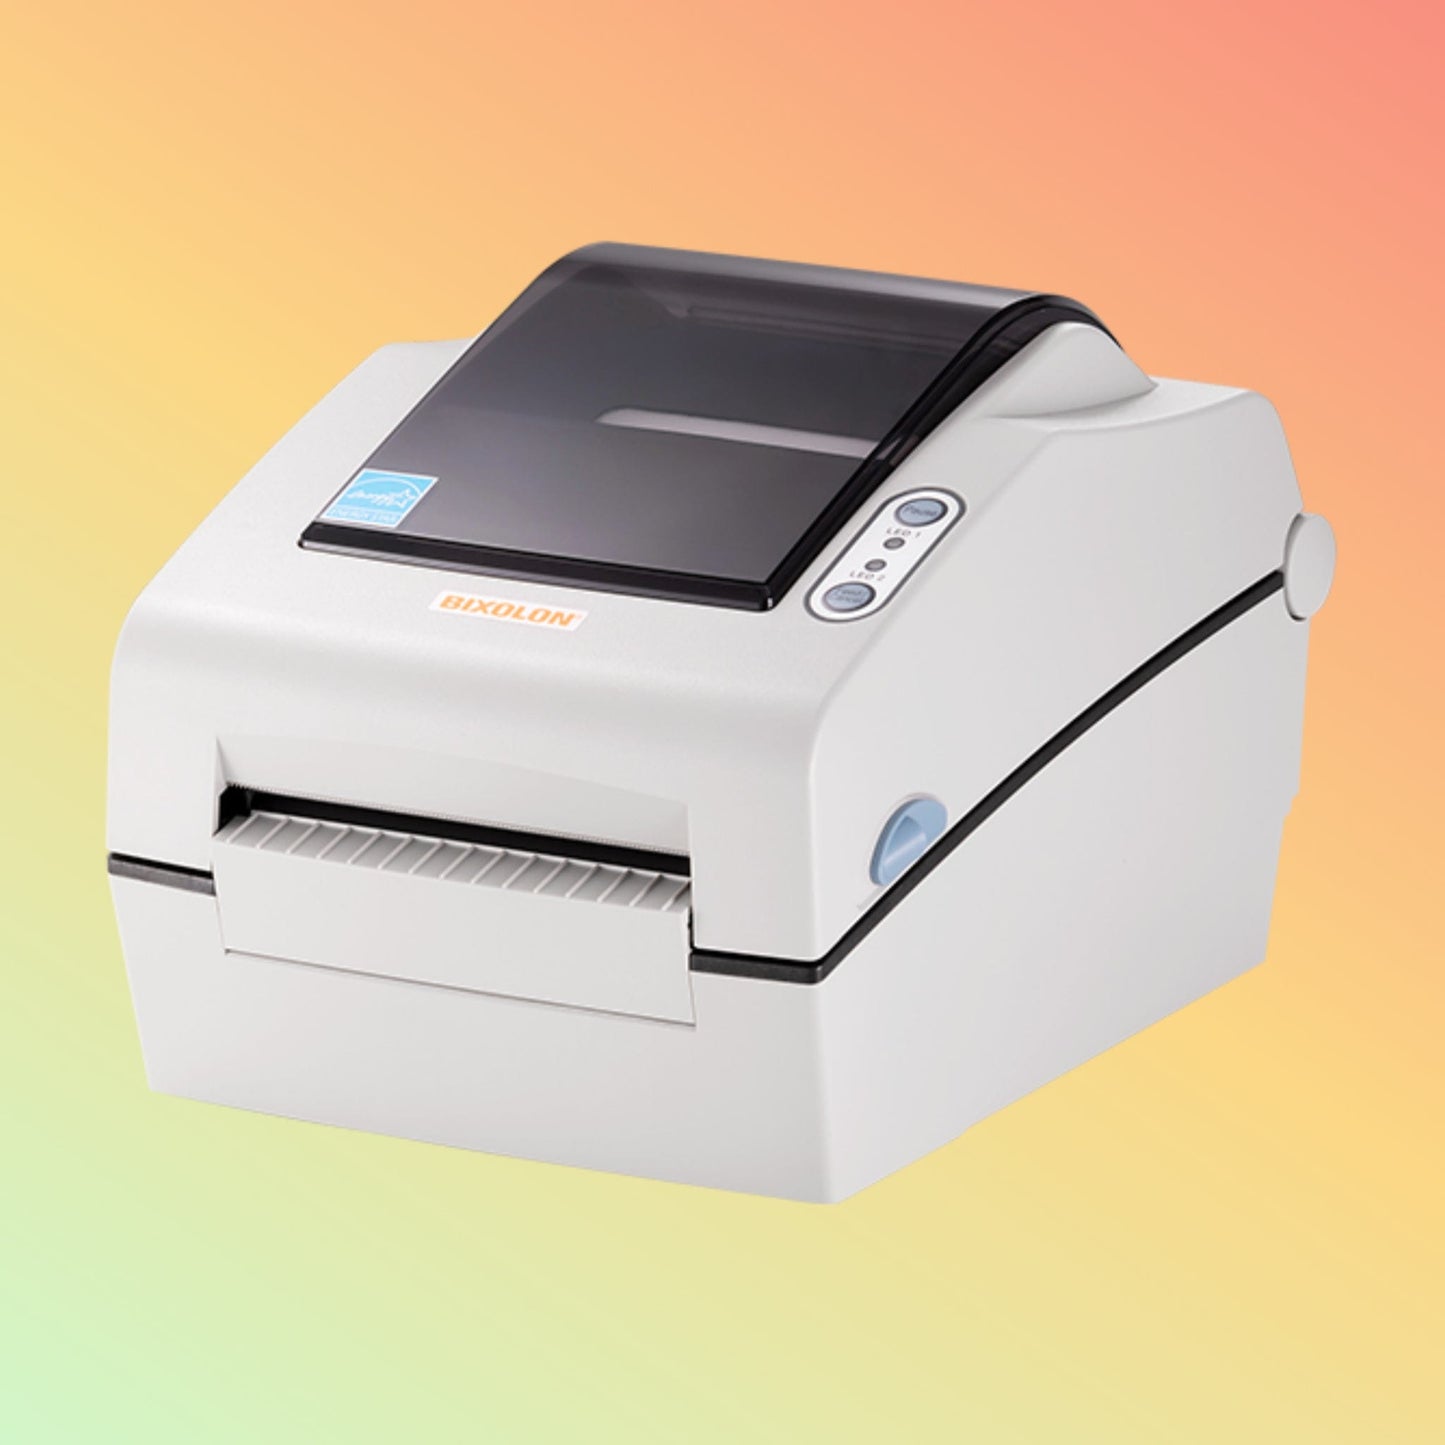 "Dependable Bixolon thermal printer SLP-D420 DG, delivering clear labels with comprehensive barcode support for diverse industries."